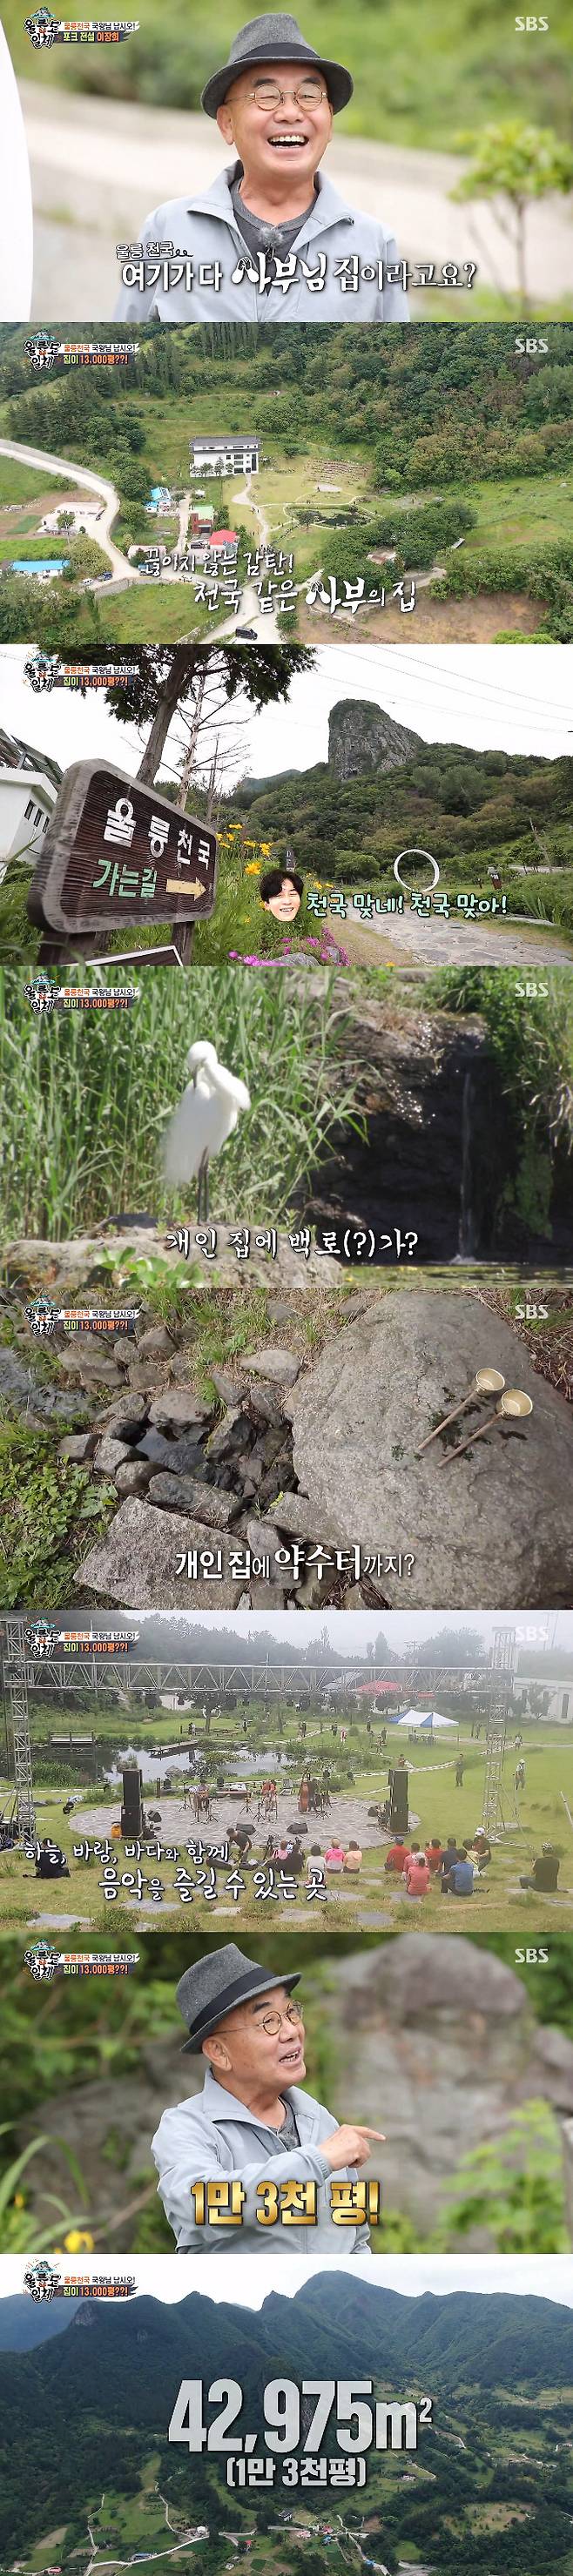 In SBS All The Butlers broadcast on the 13th, Fork Legend Yi Jang-hui, who designed his paradise in Ulleungdo, appeared as master.On this day, the members of All The Butlers were amazed at the sight of the sight as soon as they entered Yi Jang-huis house Ulleung Airport Heaven.The members constantly poured out the admiration of Is this all home, It is so cool here and It is a real heaven.Inside the house were a pond with a backlog, a natural water fountain, and an outdoor performance hall with a seat.Yi Jang-hui said, My favorite place is called heaven. This is heaven. This is the plain water, which is private land, is 13,000 pyeong including mountains.Cha Eun-woo, who heard this, expressed awe that it is the richest master ever, and laughed at Yi Jang-hui.Yi Jang-hui said, I always wondered about the reason why I settled in Ulleungdo.I stayed in the Seoraksan hermit for three months to find what I liked. One day I climbed a hill behind me, and the full moon rose.The moonlight was shining through the Searaksan Valley, and it seemed like a fairy would come out, and for the first time I felt Oh! Thats my favorite moment.What I liked was more natural than music, money, and honor. The Ulleung Airport Heaven Art Center, which was presented to Yi Jang-hui in the country, was released.The Art Center featured hits by Yi Jang-hui and photos taken during the United States of America life.Yi Jang-hui, who saw a picture of Mustache, said, I was riding a motorcycle and I was flying because of an accident.Then I went to the hospital and found my teeth stuck in my lips. The doctor asked me to raise Mustache to cover my face.I started to raise Mustache from then on, he said of the story about trademark Mustache.Yi Jang-hui said: The President of America (United States of America, 41st President) was in our companys editorial office.The whole of LA had become lawless, and a lot of one stores were involved in riots, and one stores were damaged by riots.Thats when our radio helped with Ones communication network, and the Ones who heard it united and went to help, he said.At that time, the Korean reserves and Radio Korea were able to greatly reduce the damage of the black riot in Los Angeles.Yi Jang-hui then released a photo of President George Bush, saying he visited the station and broadcast it.The members of All The Butlers who watched the photo admired that I think it is a presidential aide when I look at the picture and I feel like I am not pushed in a fight.